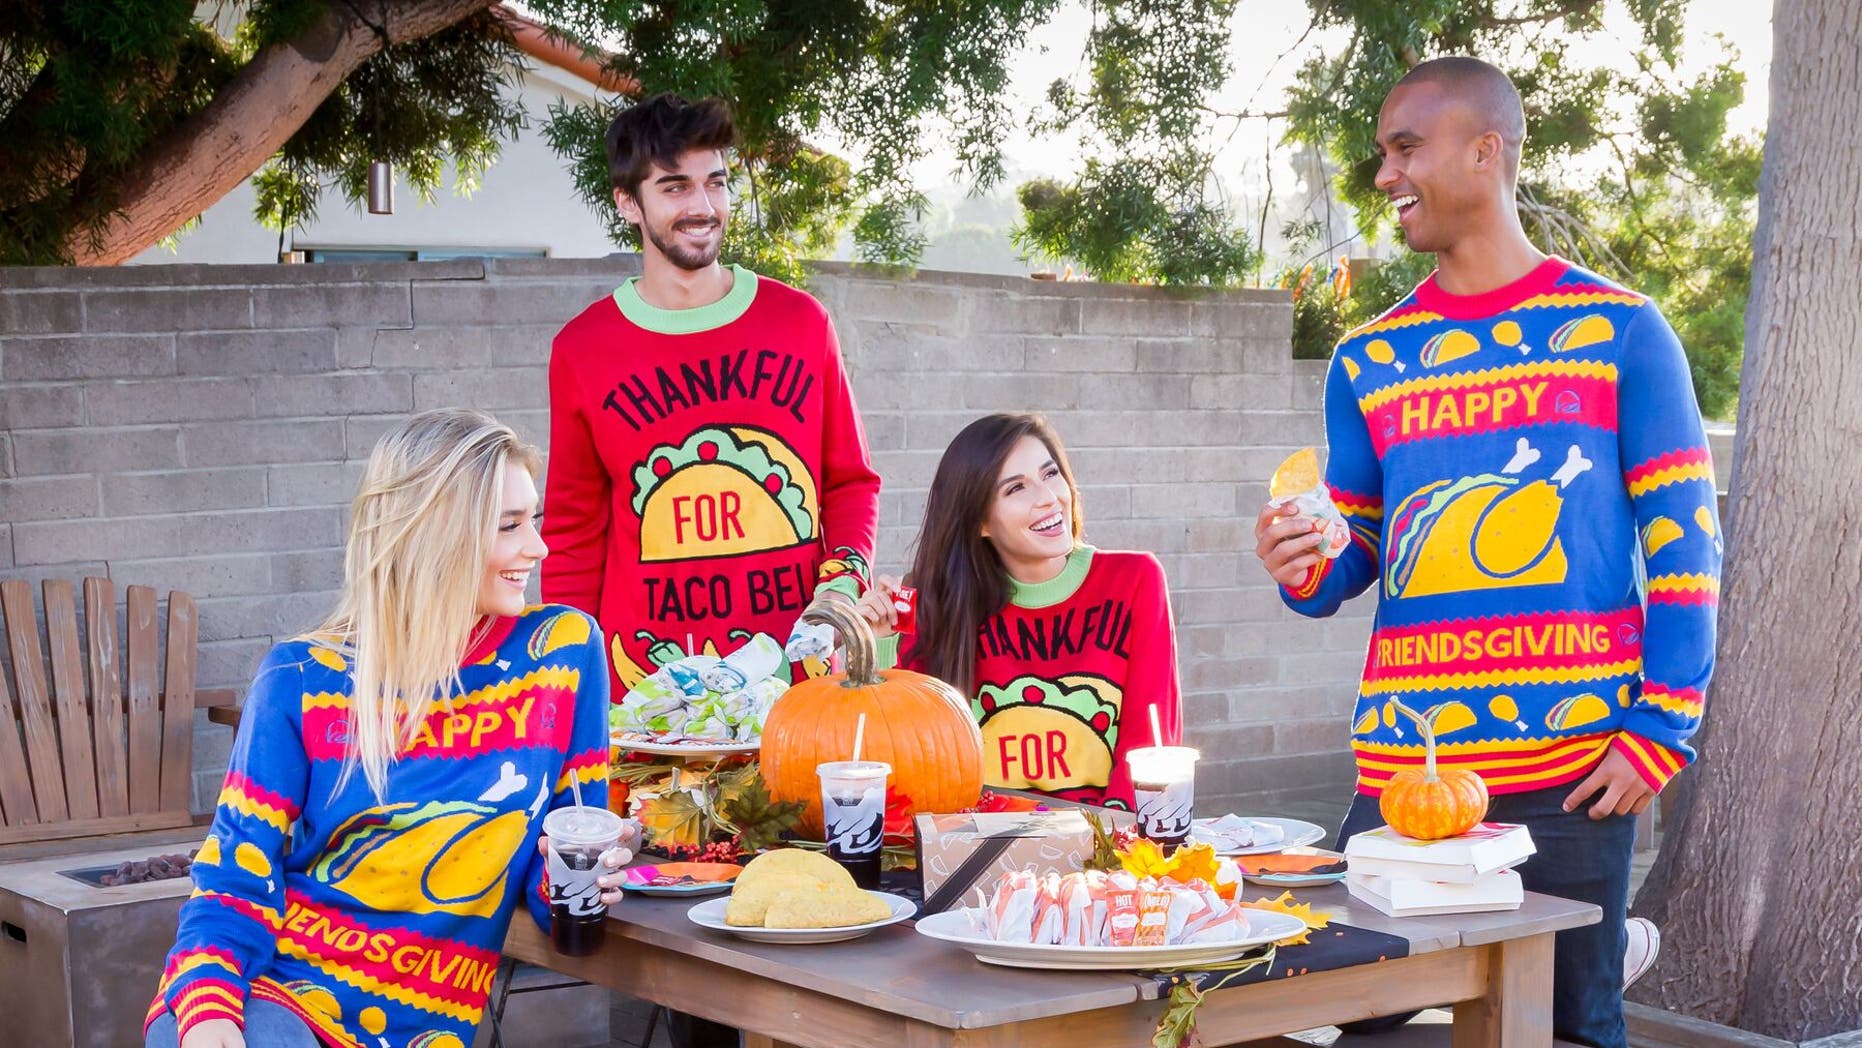 Taco Bell teamed up with Tipsy Elves to release a line of taco-themed sweaters and leggings fit for the holidays.